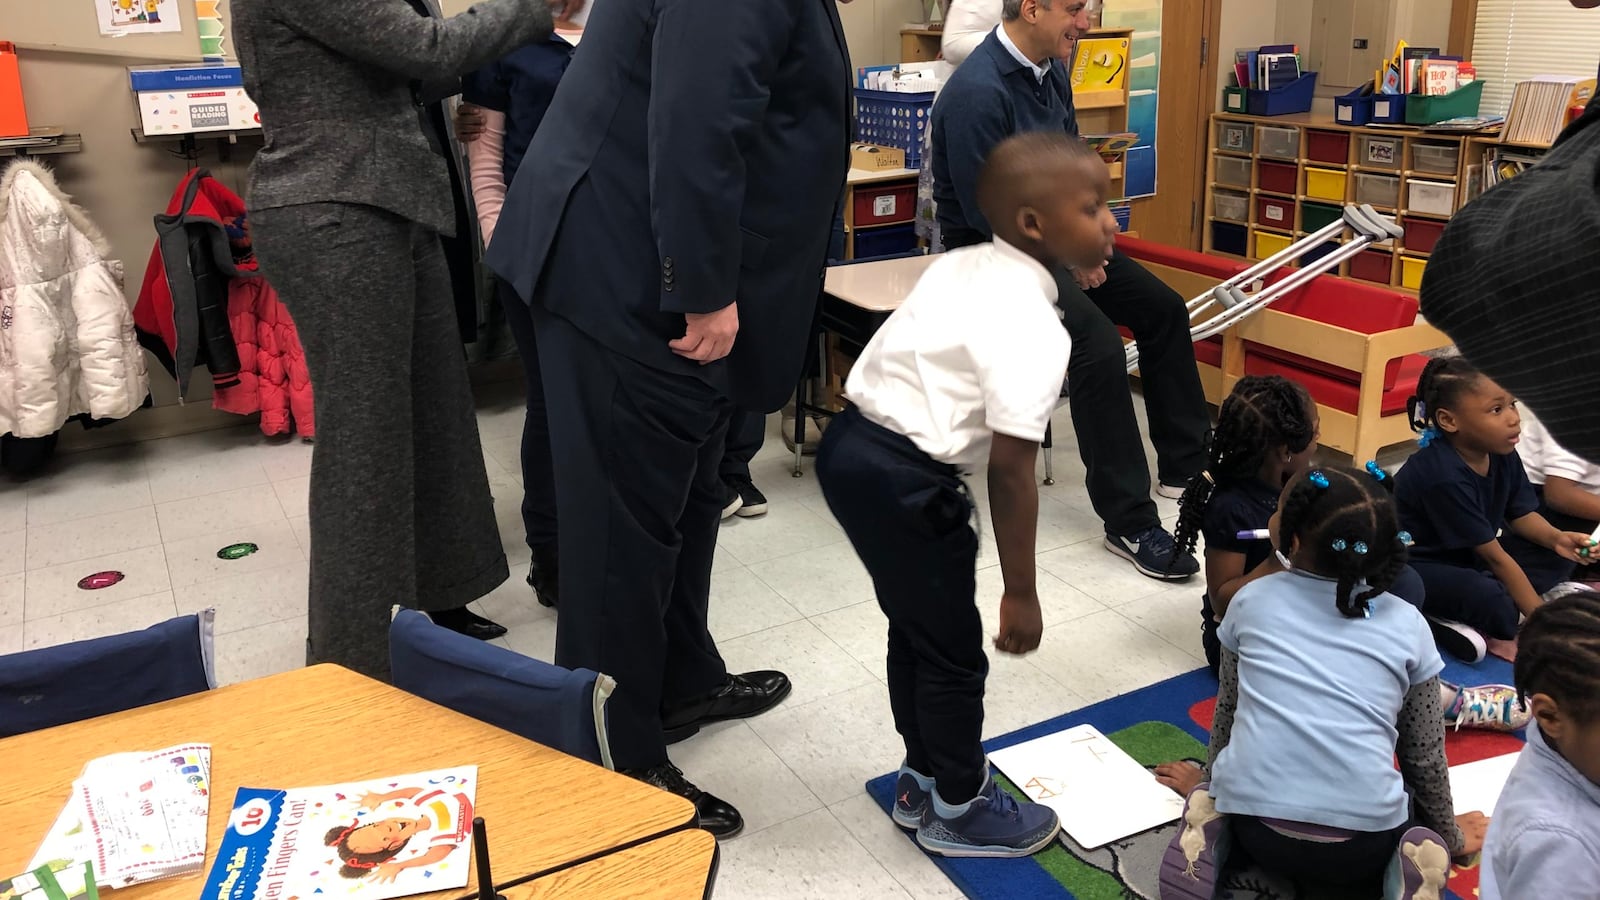 Illinois Gov. J.B. Pritzker visited a Chicago school last spring to tout additional investments in early education.